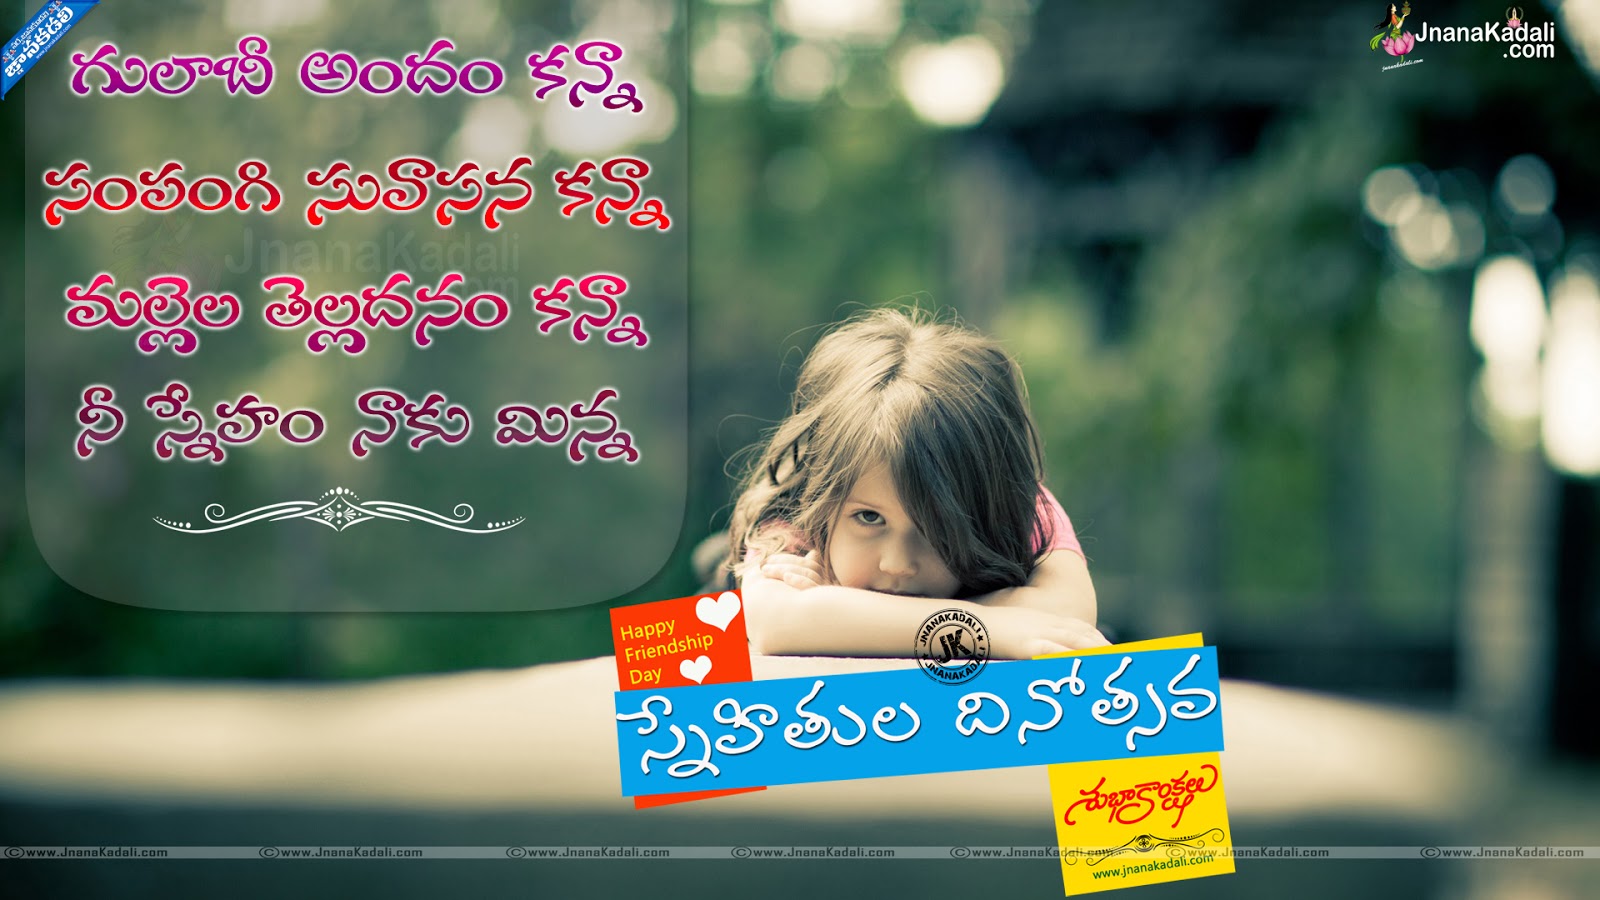 Friendship Day Telugu Quotes Wishes Greetings Images - Profile Cover Photo For Fb Girl - HD Wallpaper 